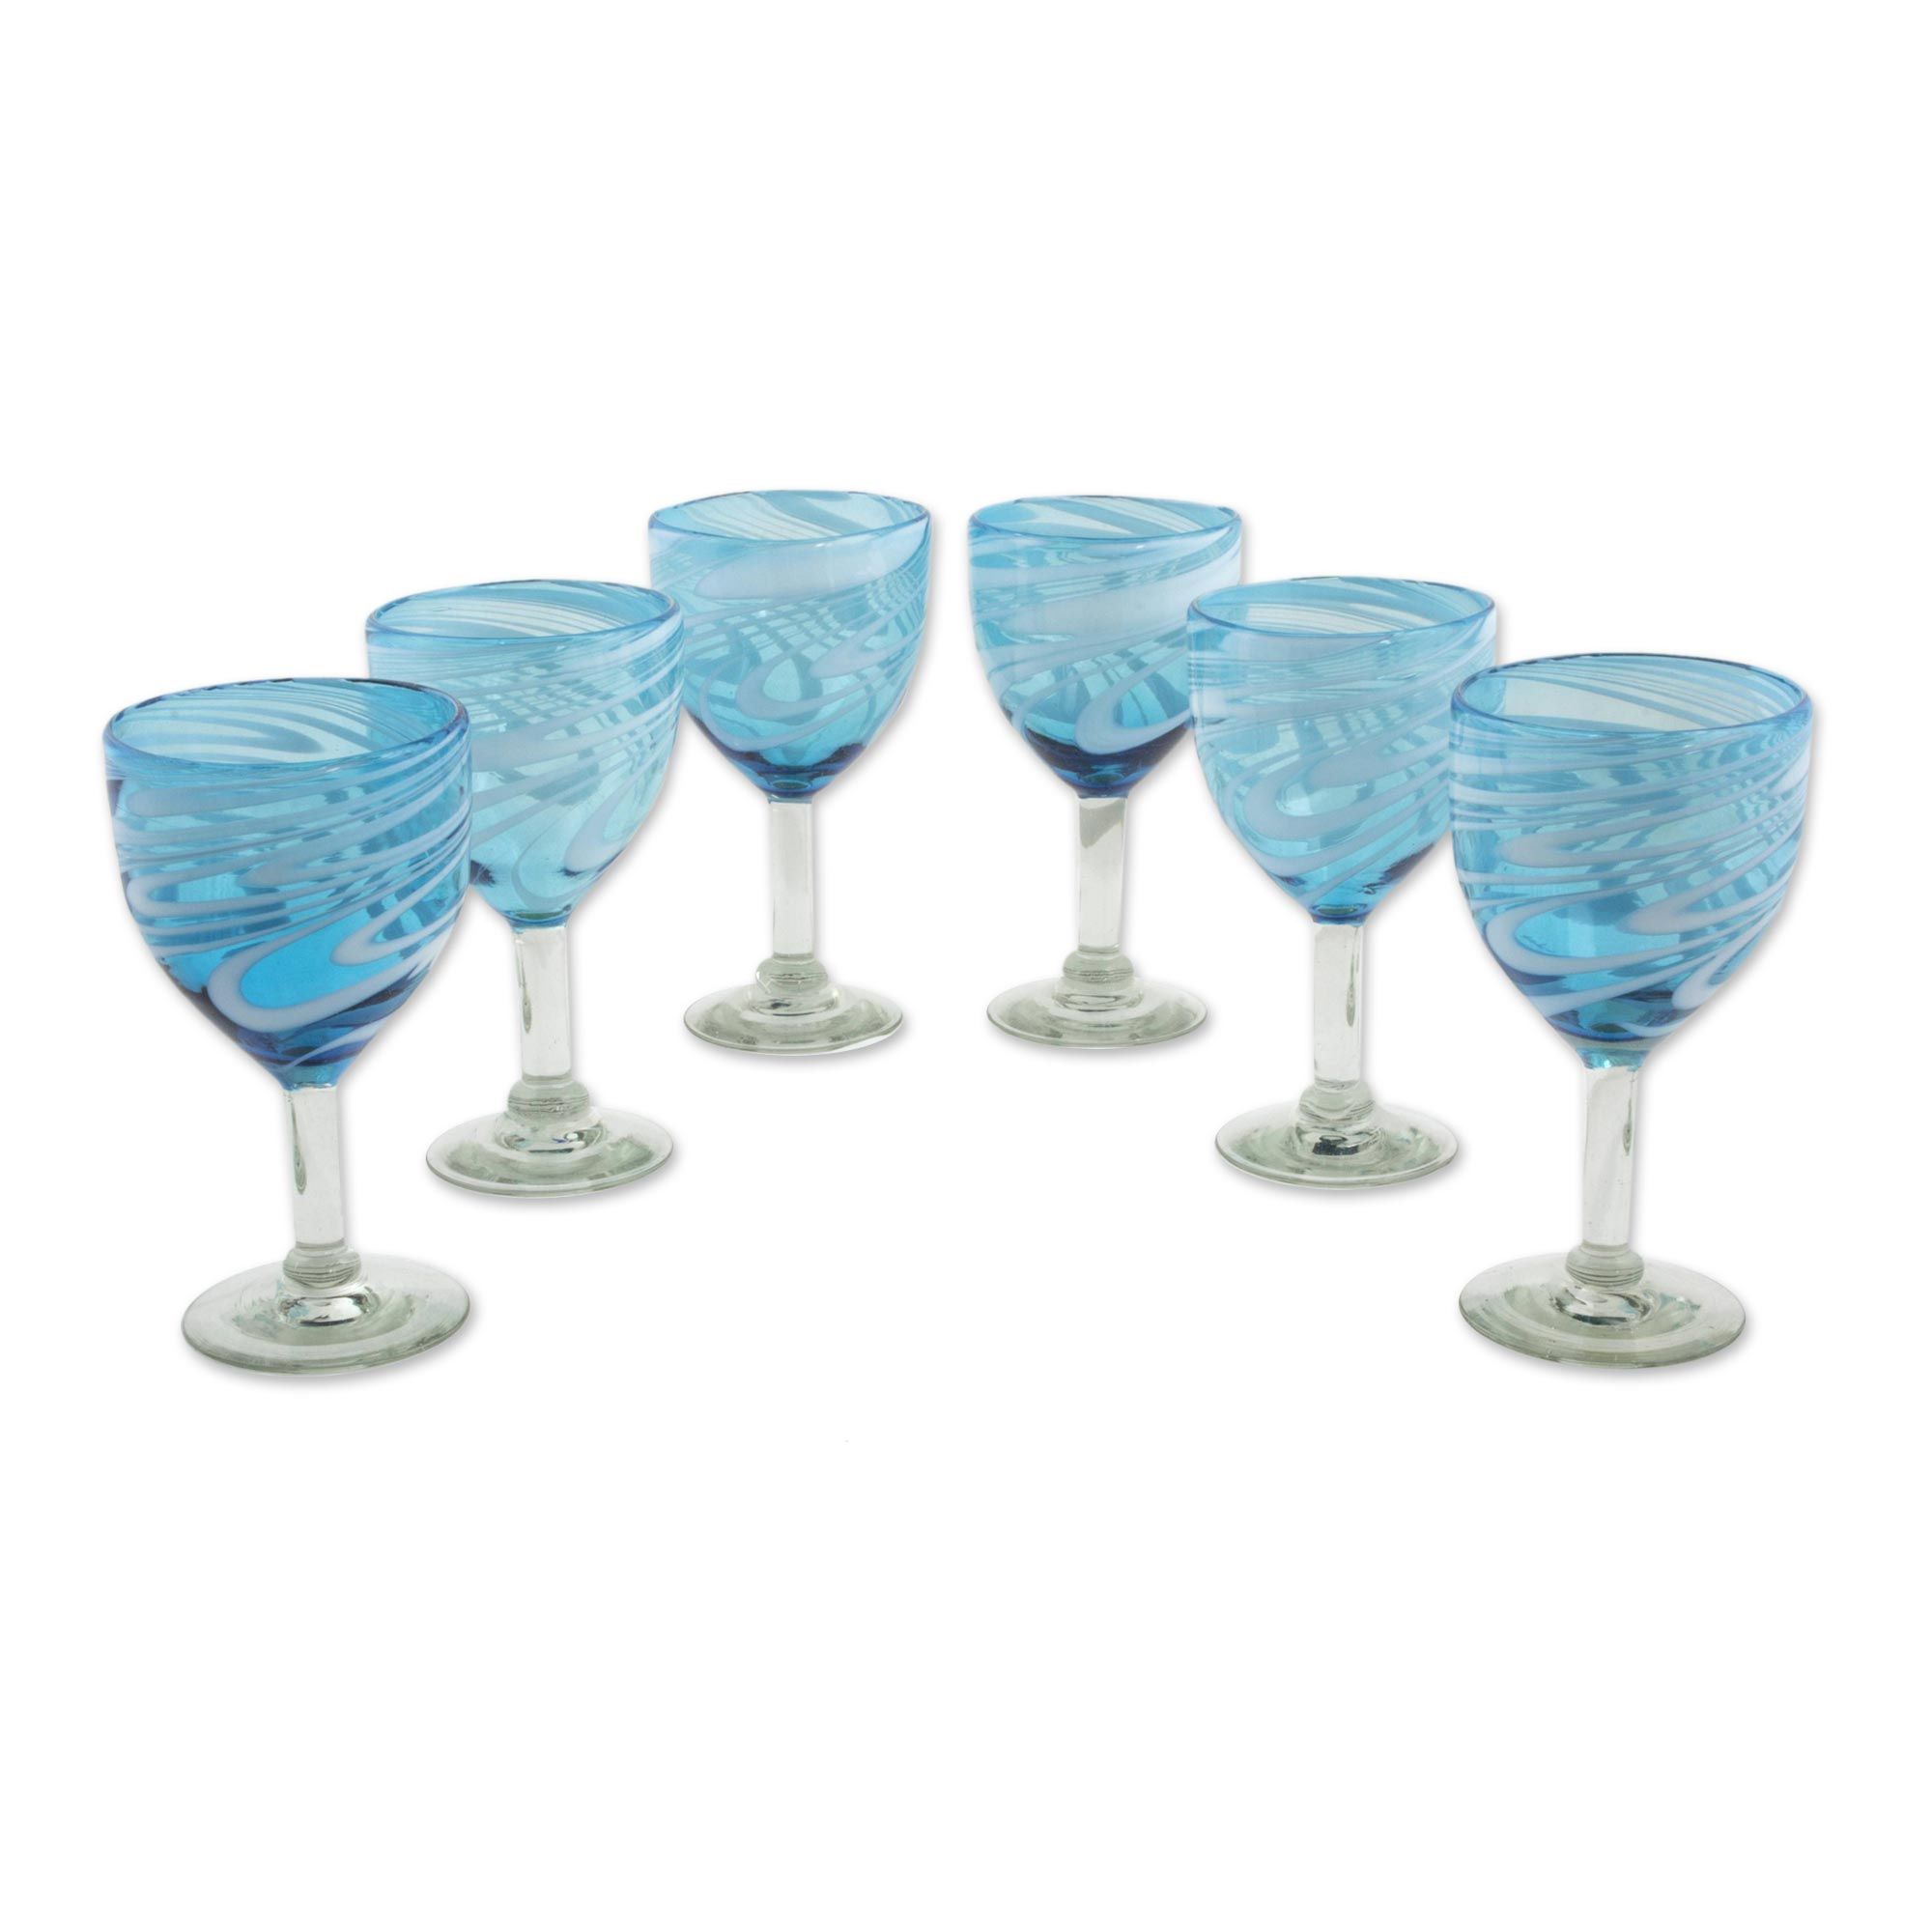 UNICEF Market | 6 Hand Blown Wine Glasses in Aqua and White from Mexico ...